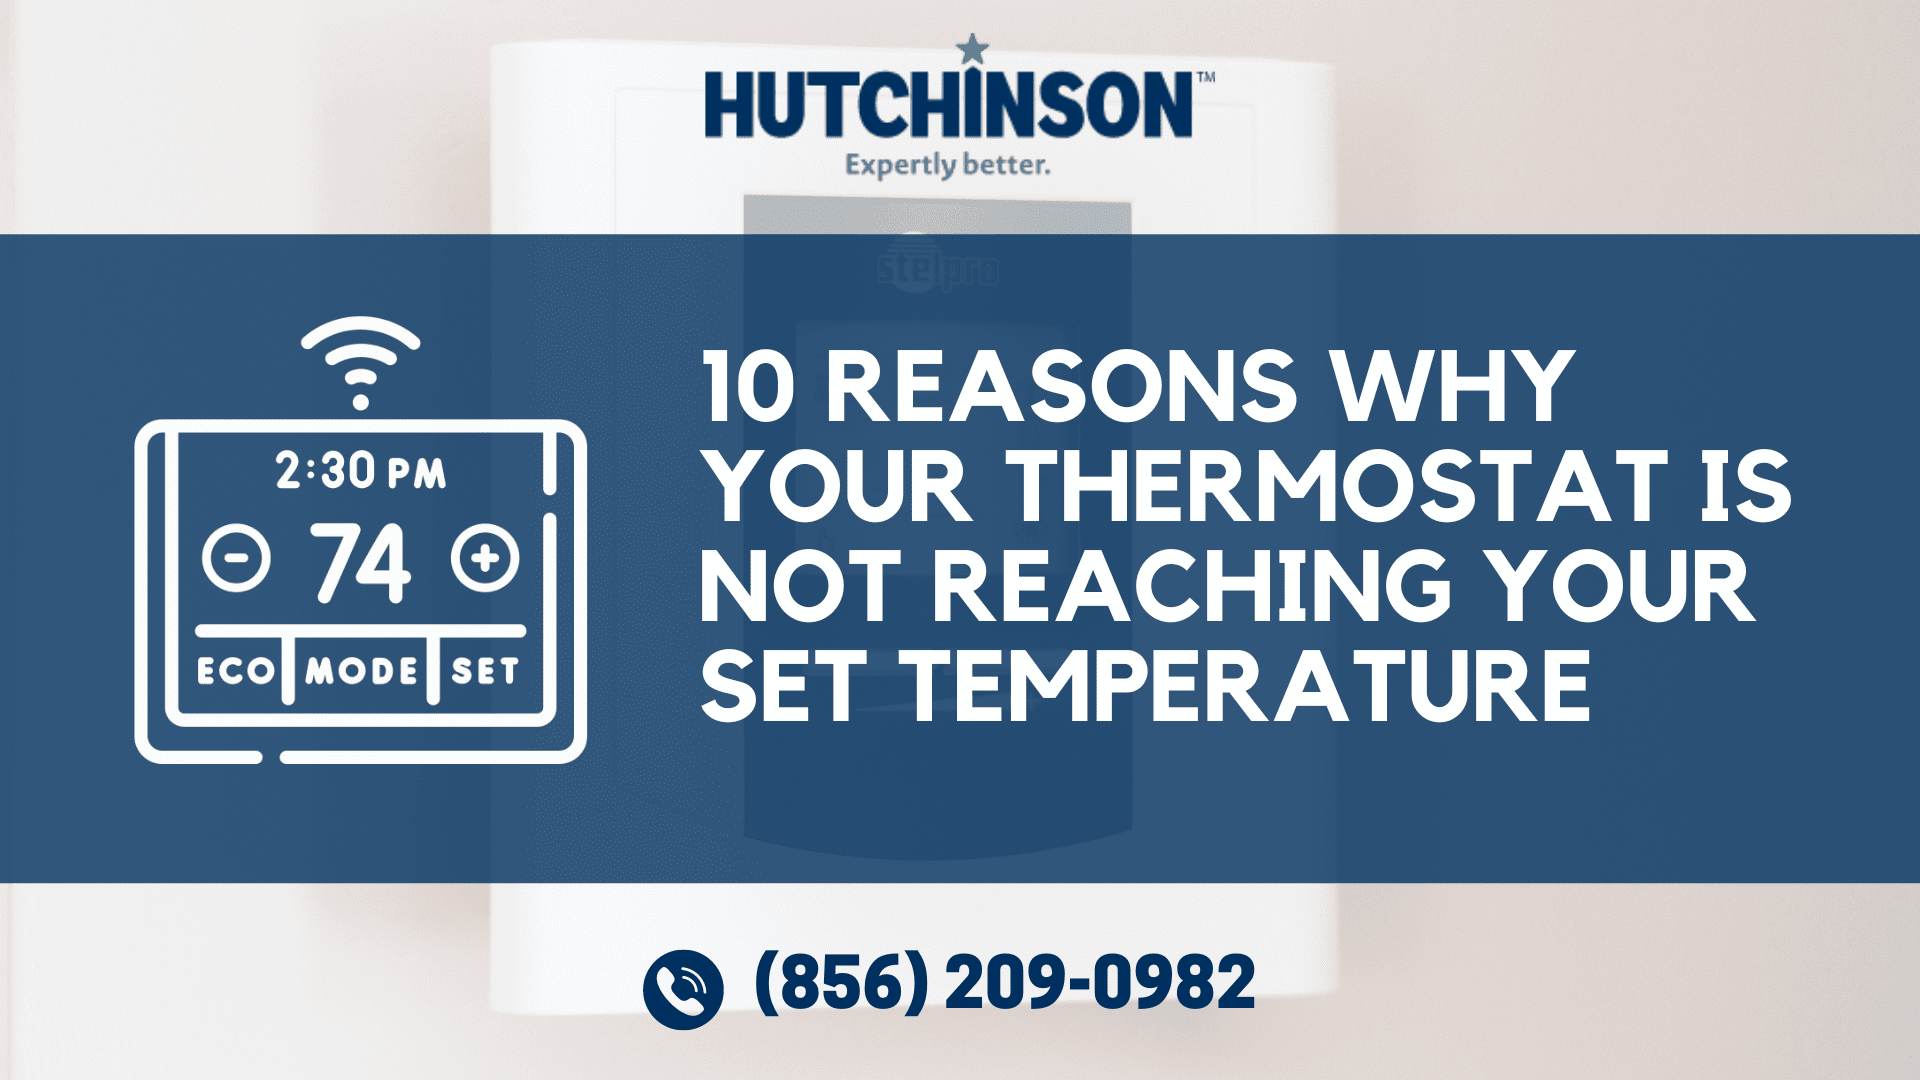 5 Reasons Why Your Thermostat Stopped Working